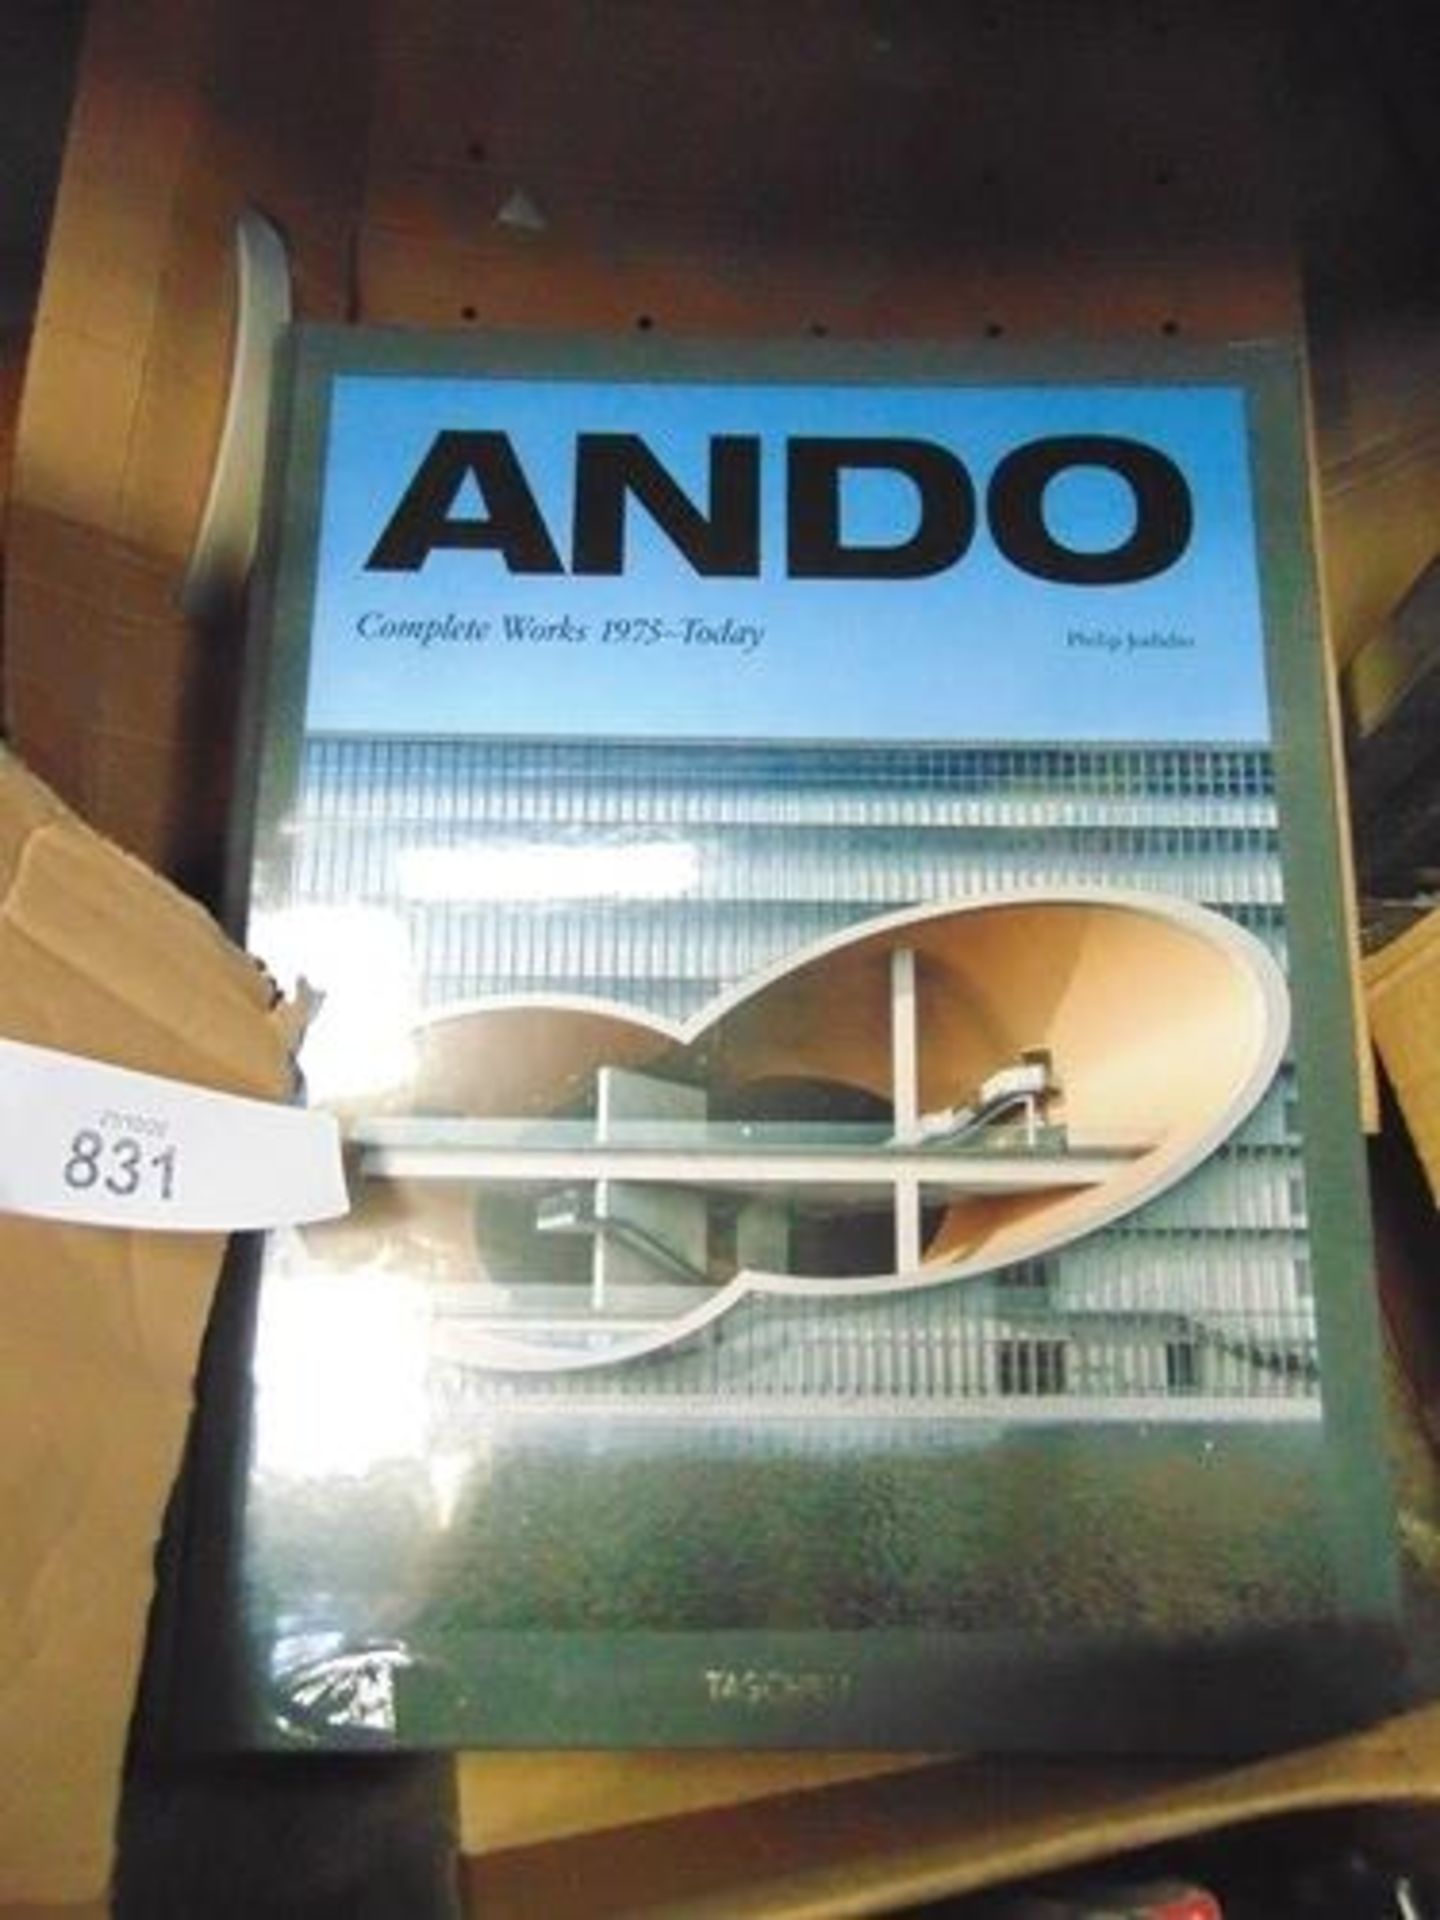 A copy of Ando Complete Works 1975 - Today by Philip Jodidio, published by Taschen, 2 x The Complete - Image 3 of 5